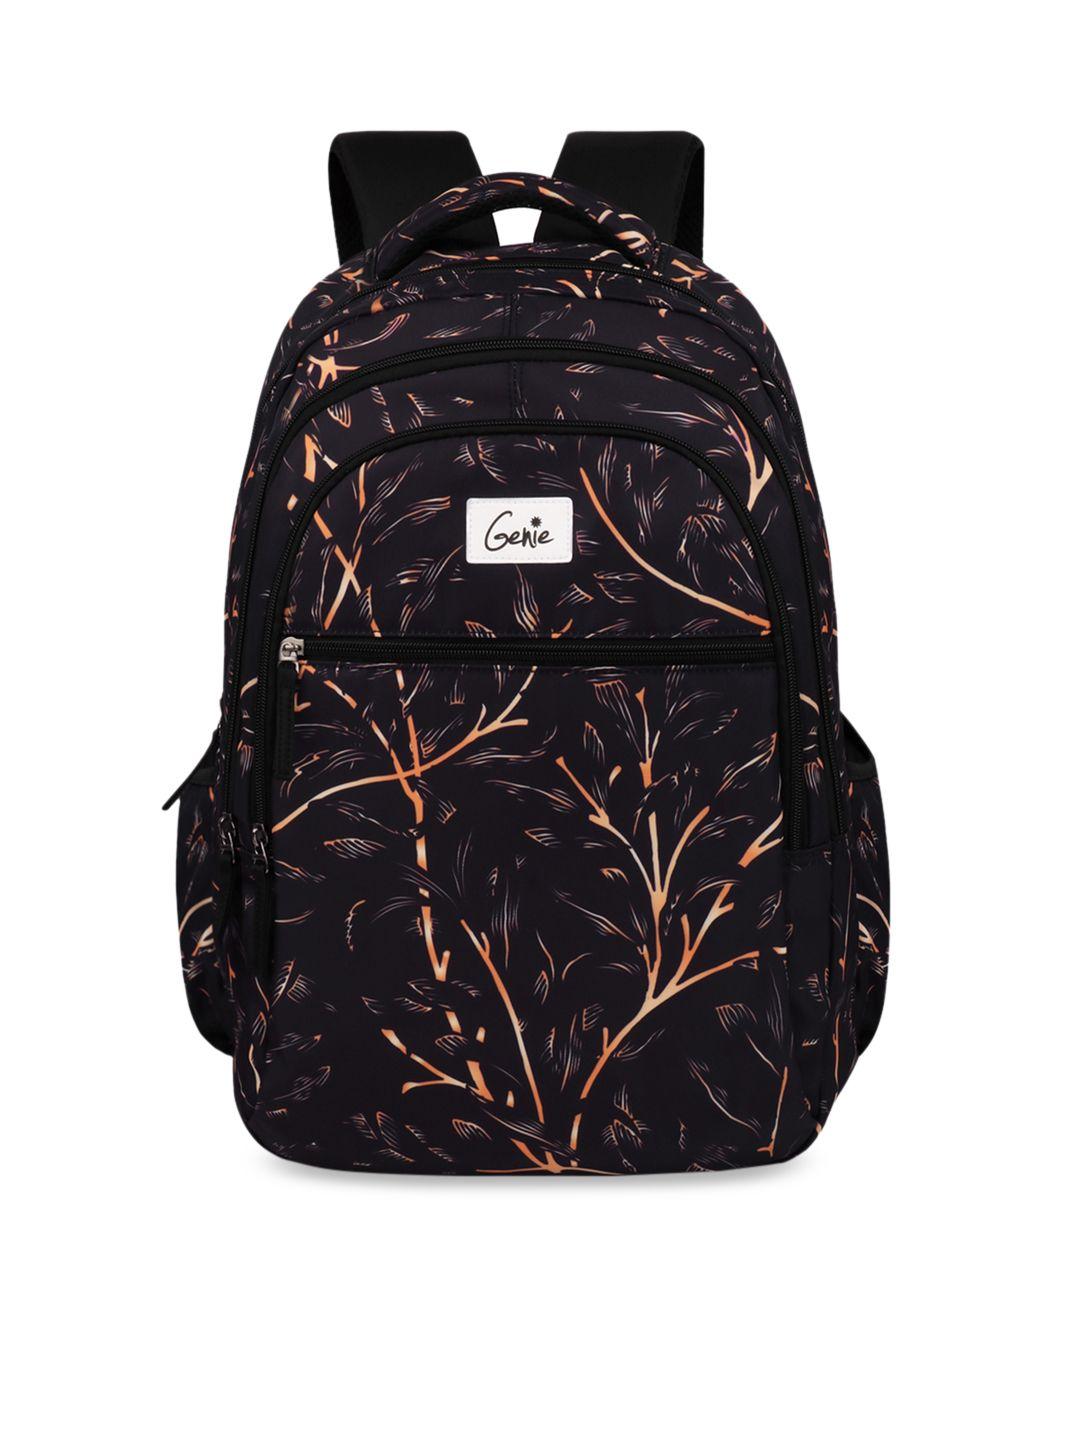 genie unisex graphic printed large laptop backpack-36l